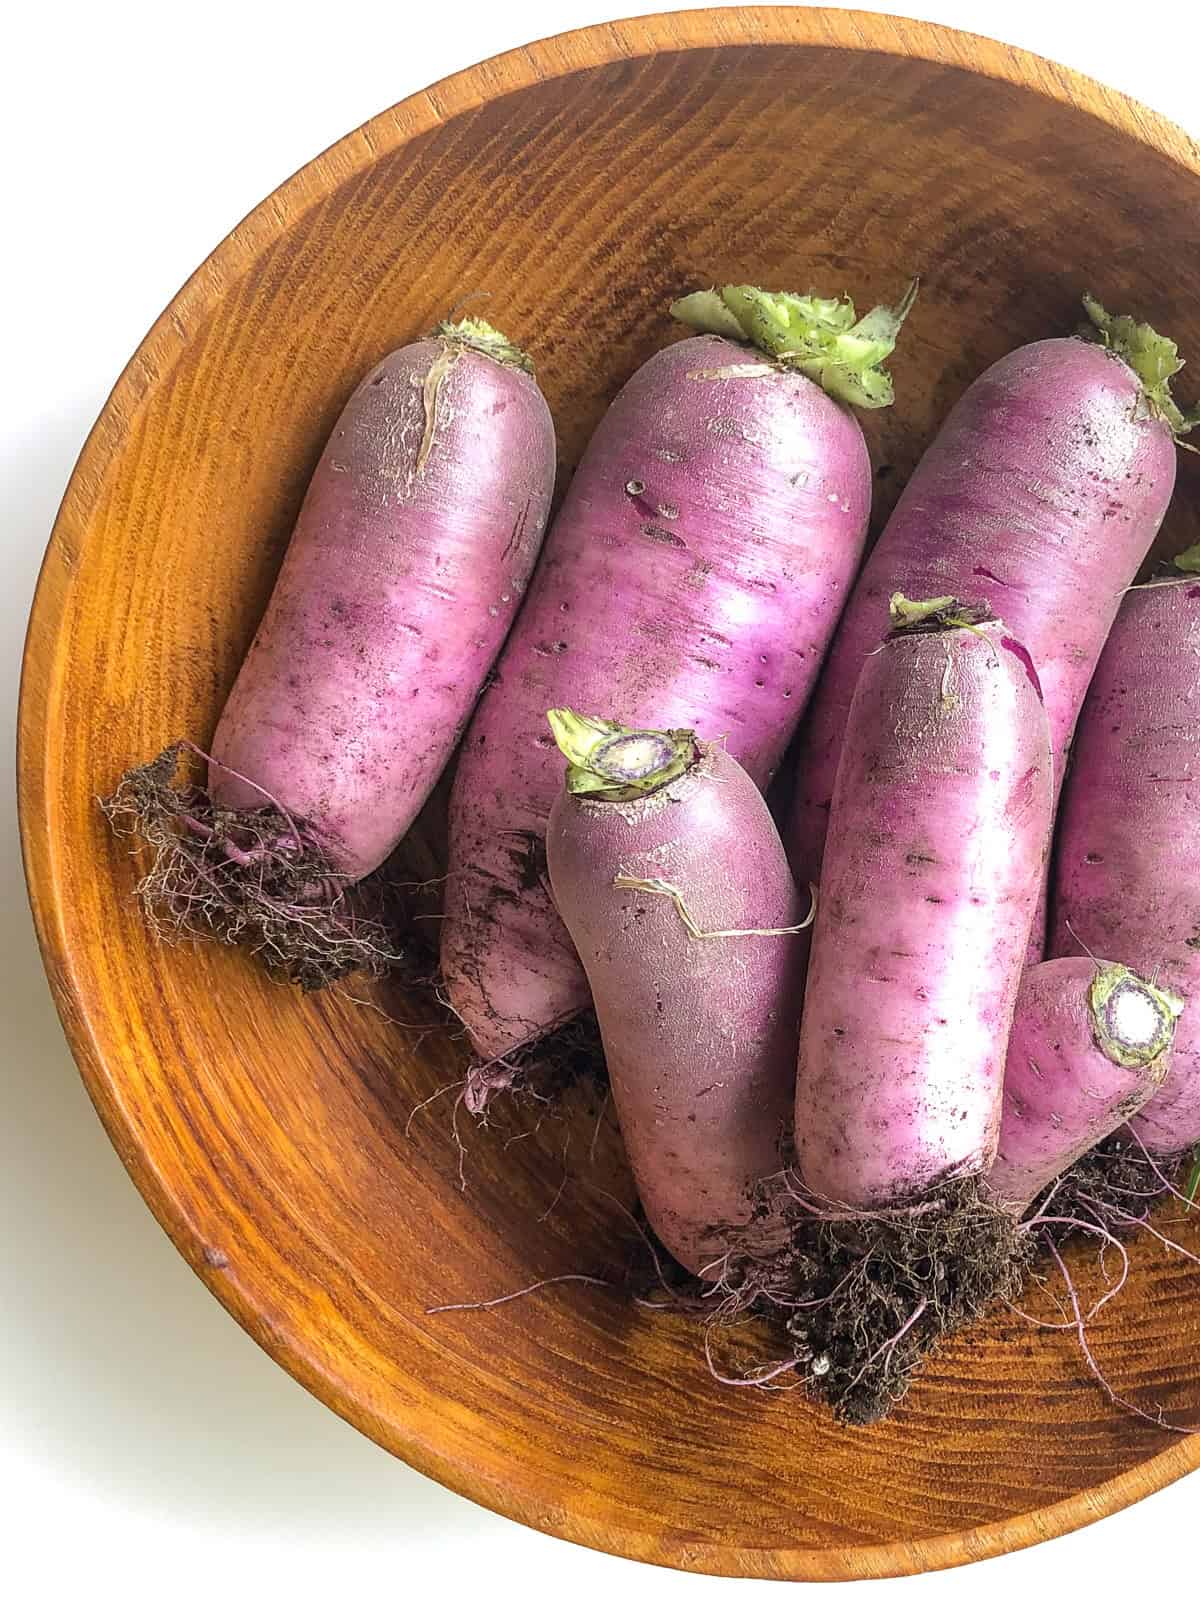 An image of a wooden bowl filled with freshly picked purple daikon radishes.